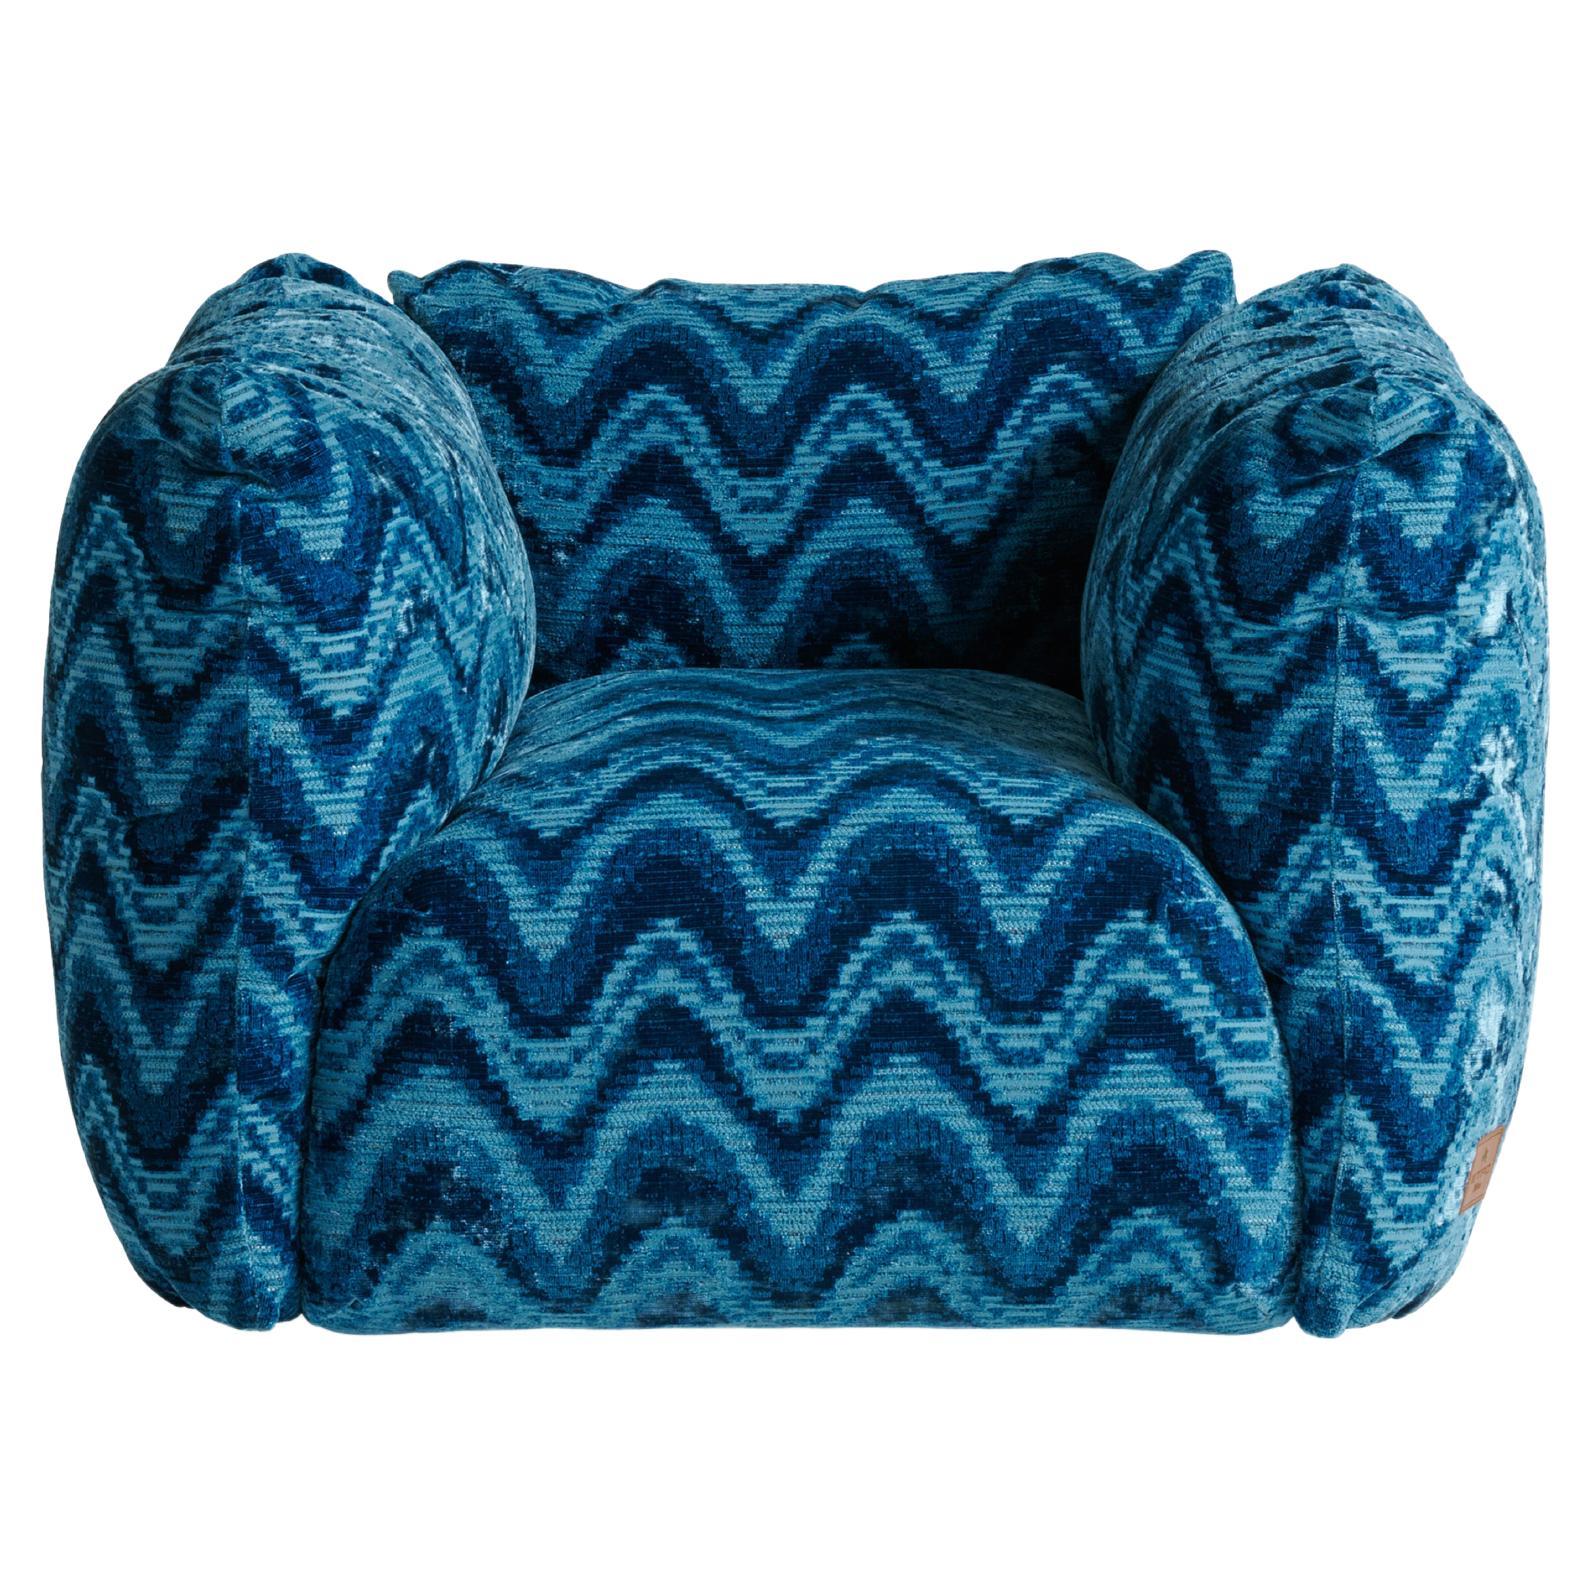 21st Century Cushy Armchair in Blue Jacquard Fabric by Etro Home Interiors For Sale